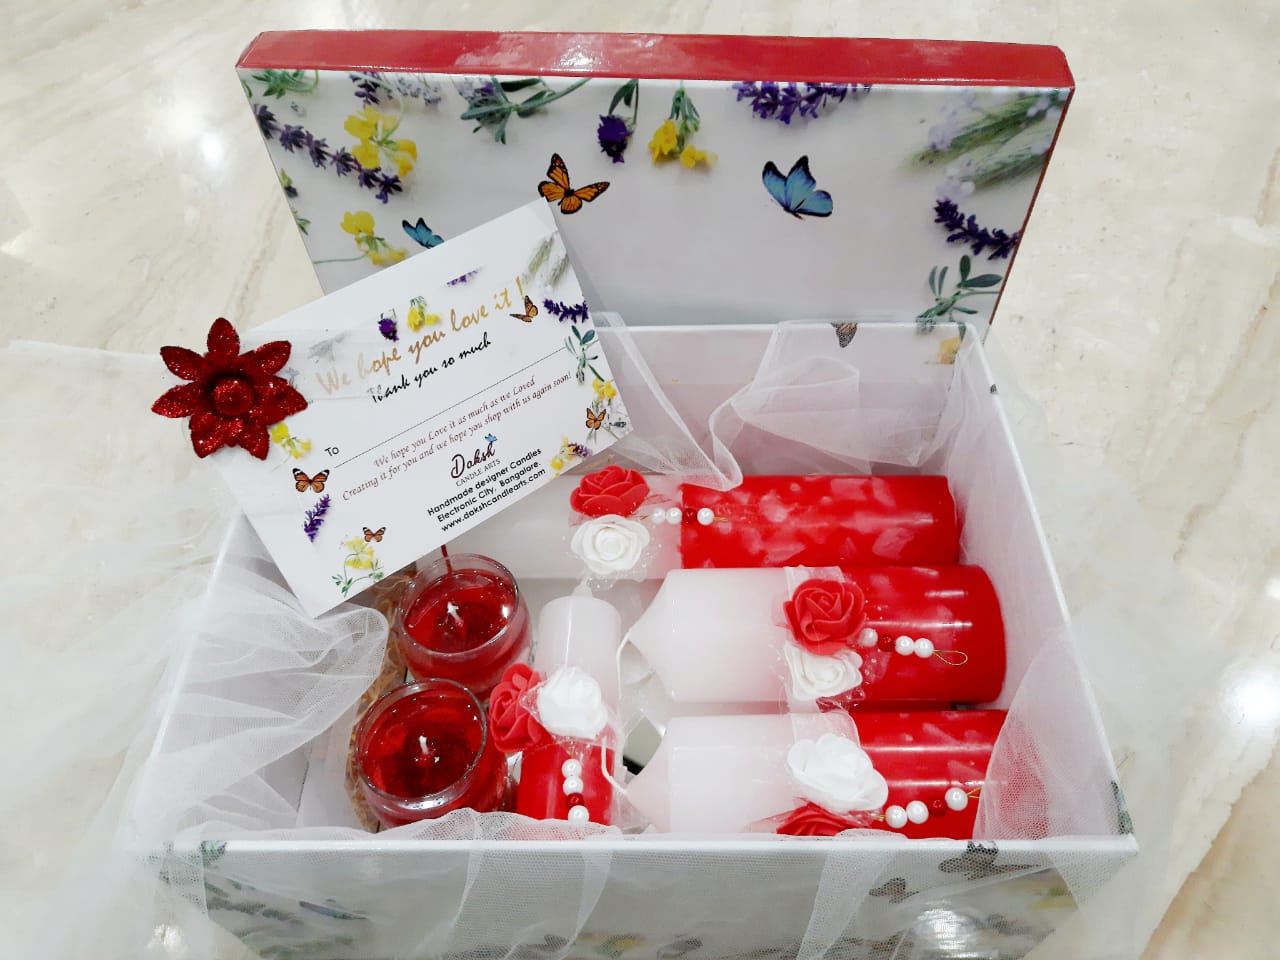 Ribbon Tie Gift Box Large Ribbon Tie Gift Boxping Box With Ribbon  Decorative Gift Boxes Wholesale Gold Silver Gift Packaging Packing Paper  Boxes 230316 From Kong08, $11.81 | DHgate.Com